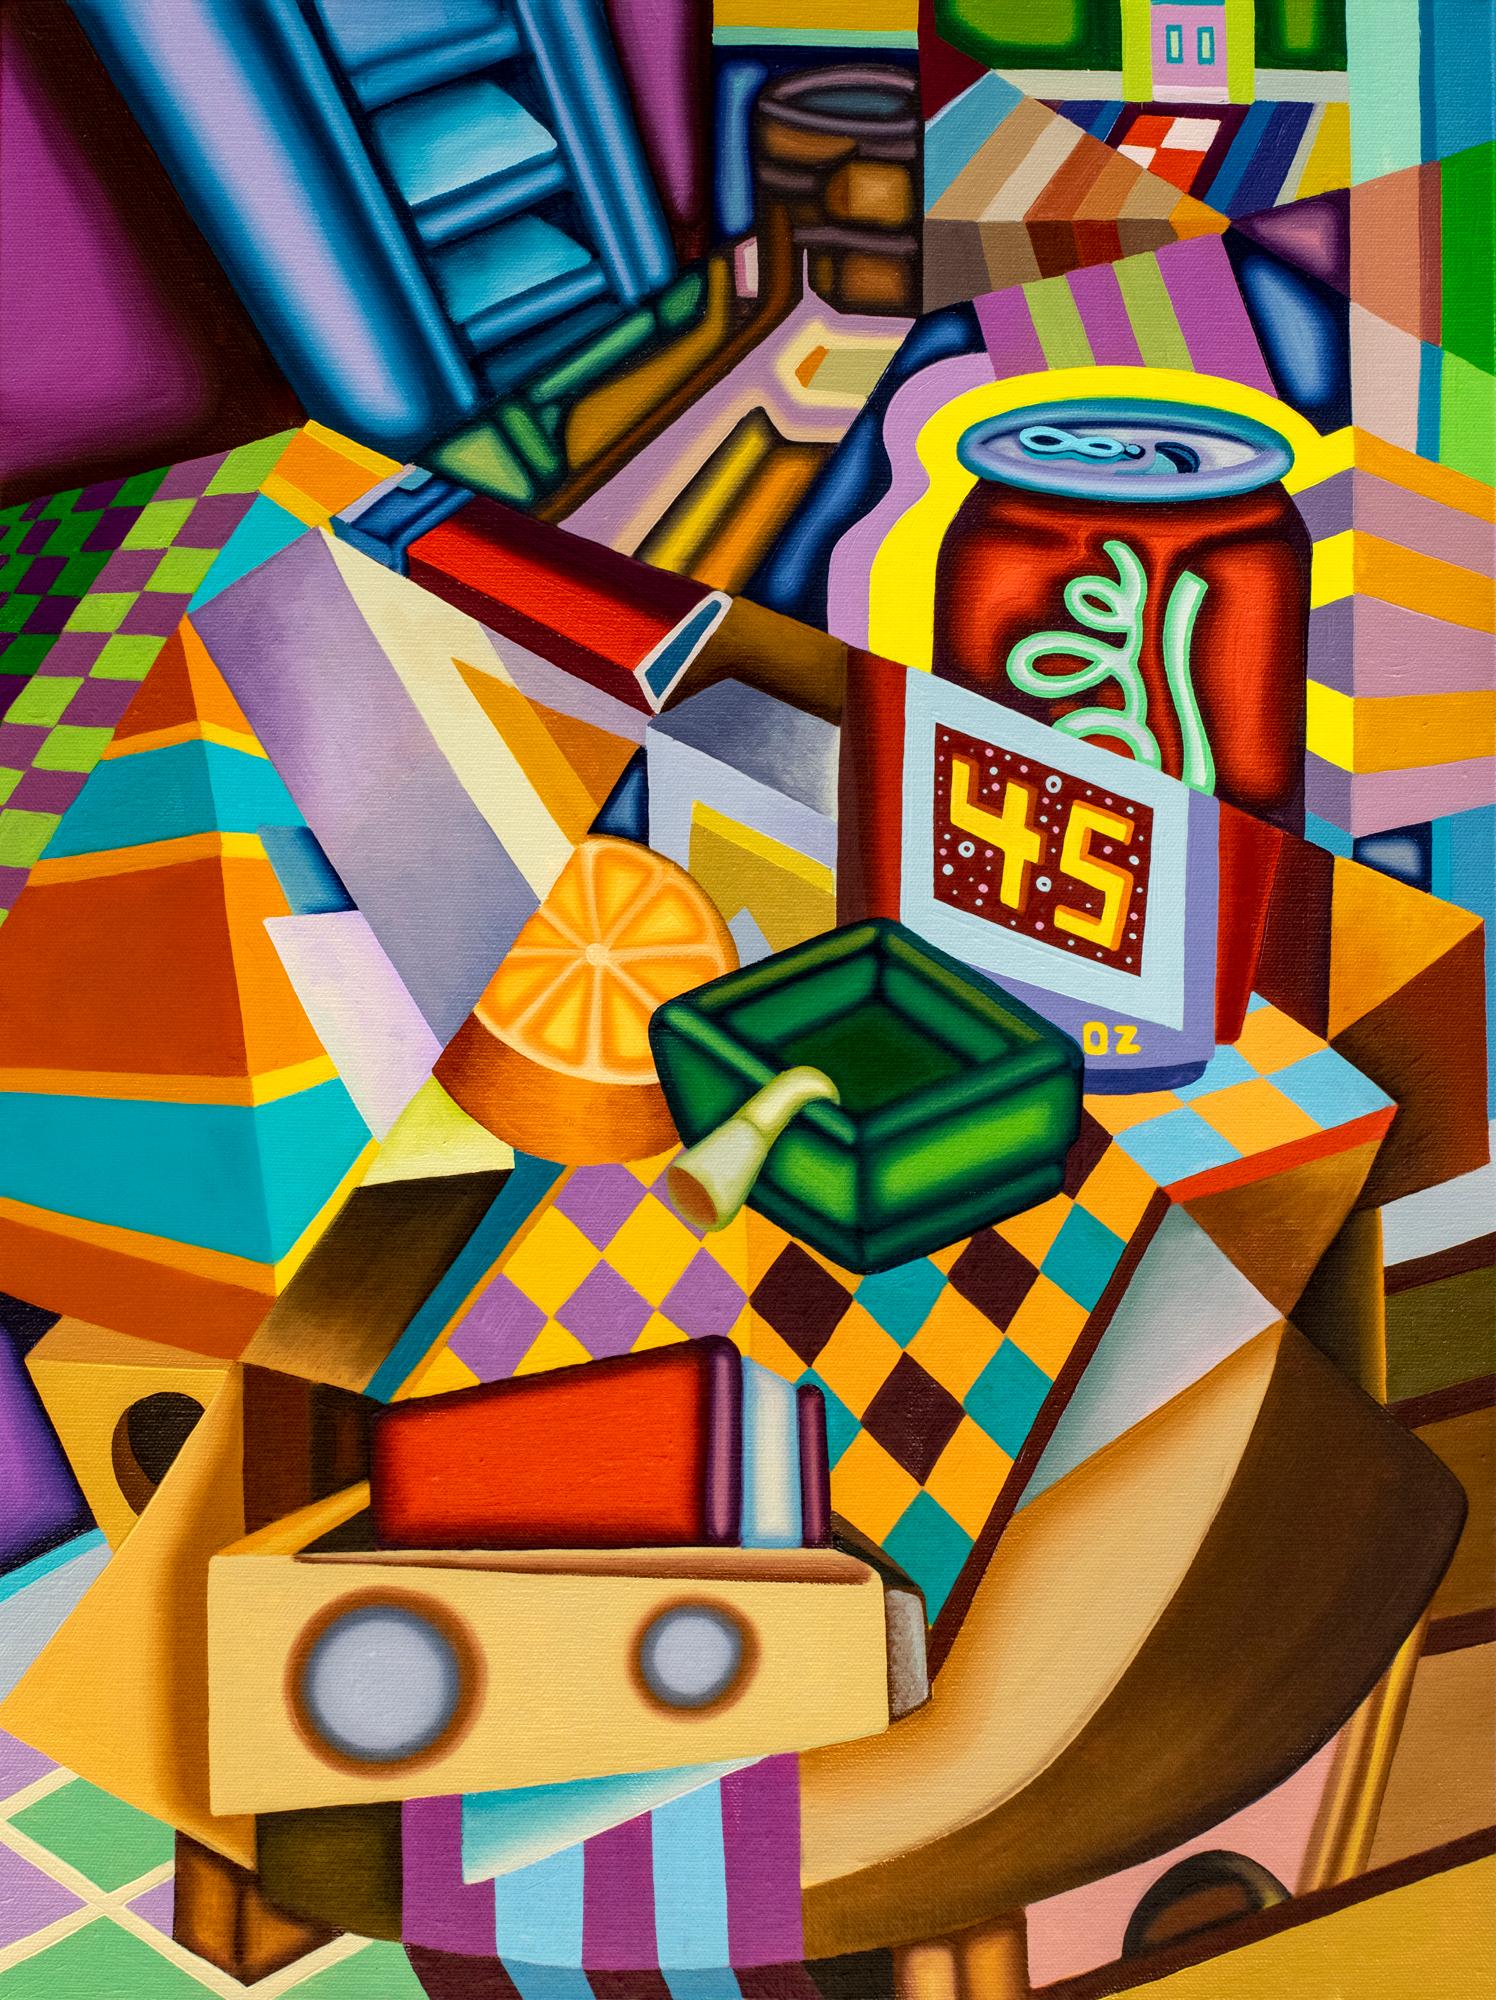 45 OLé COLLAPSE- Cubist, Surreal Still Life with Bold Colors, Beer Can, Orange